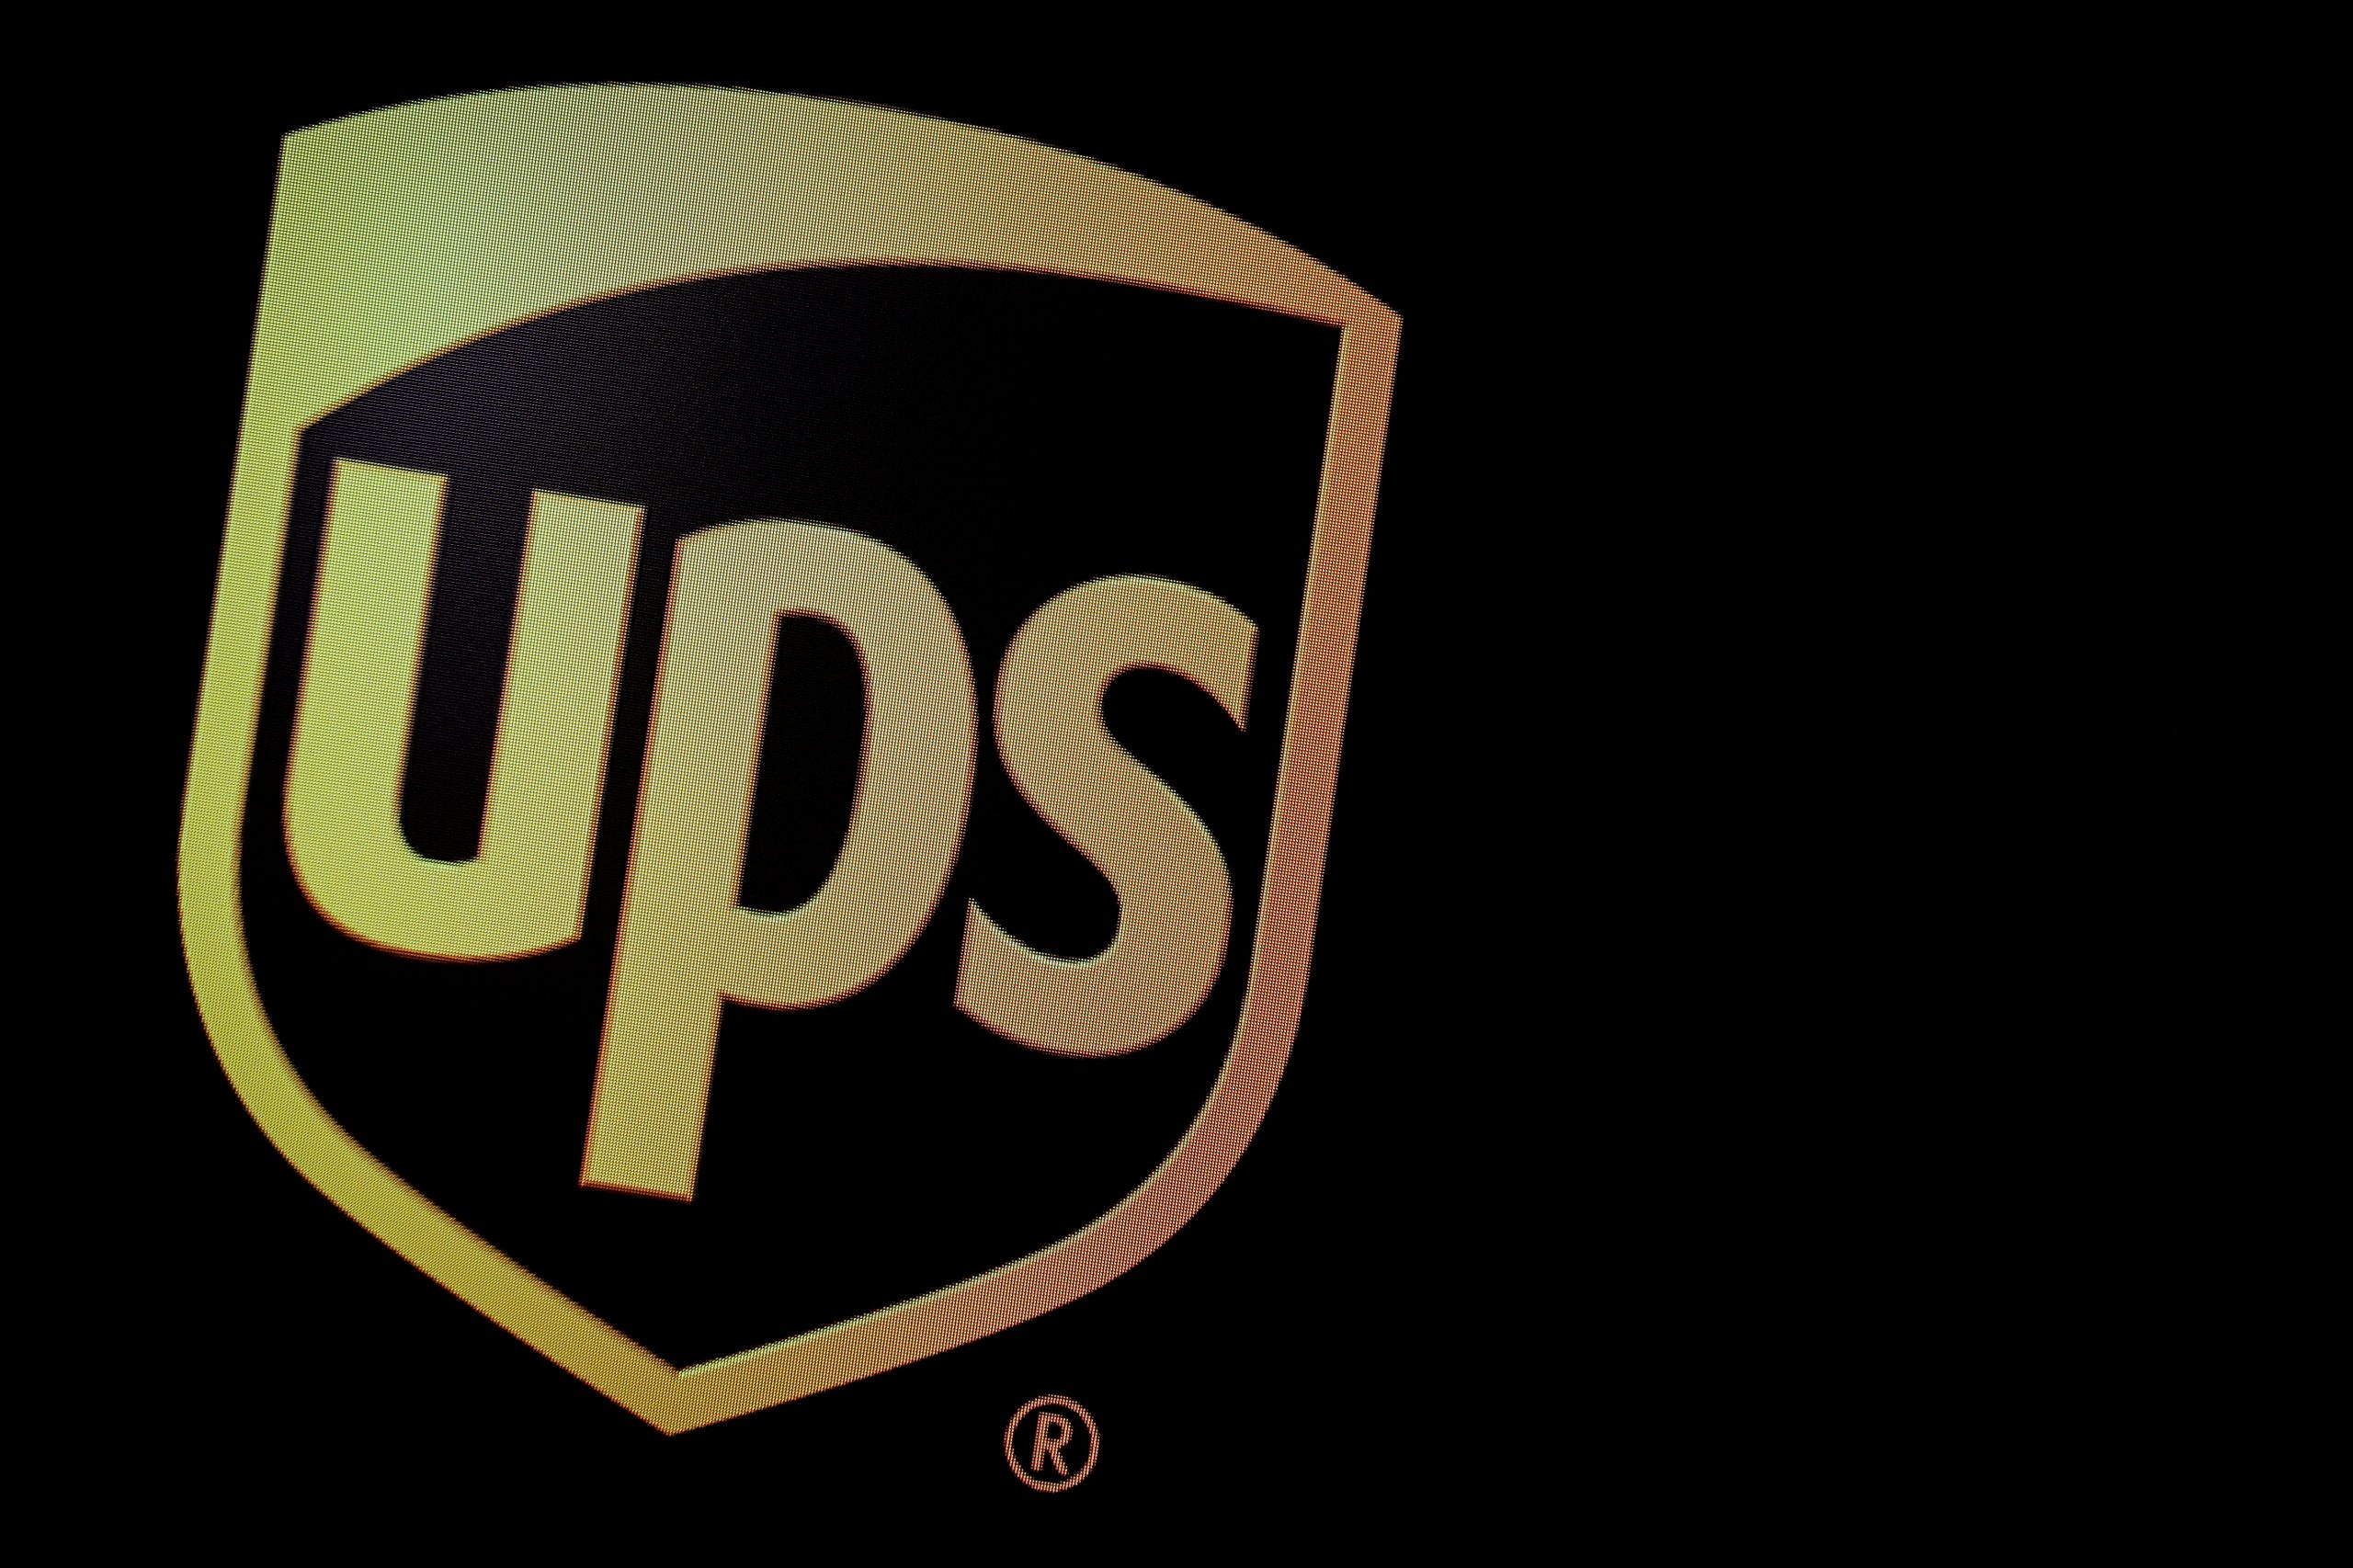  UPS shares fall as investors fret over post-pandemic growth plan